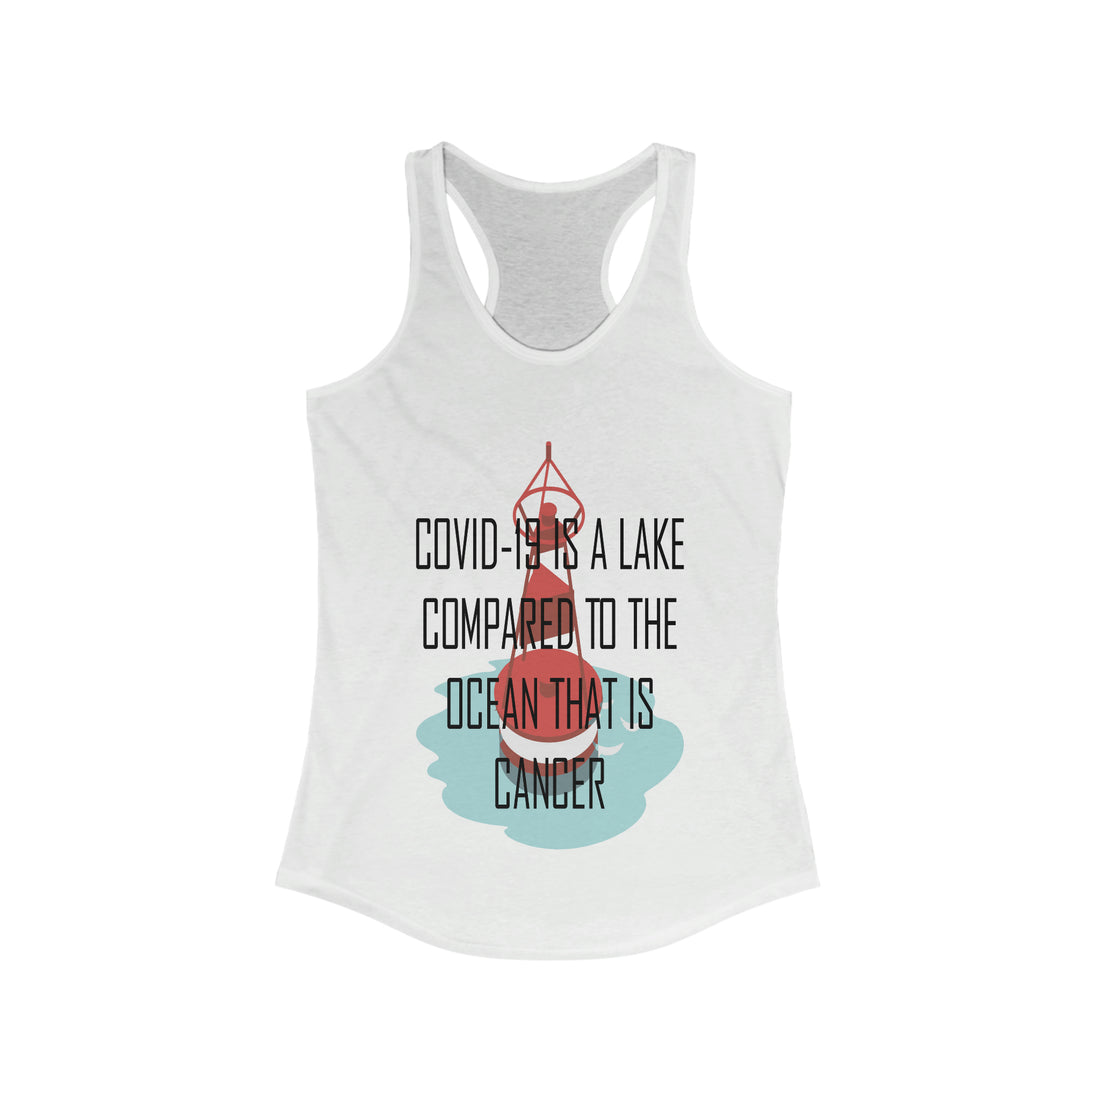 Covid-19 Is A Lake Compared To The Ocean That Is Cancer - Racerback Tank Top